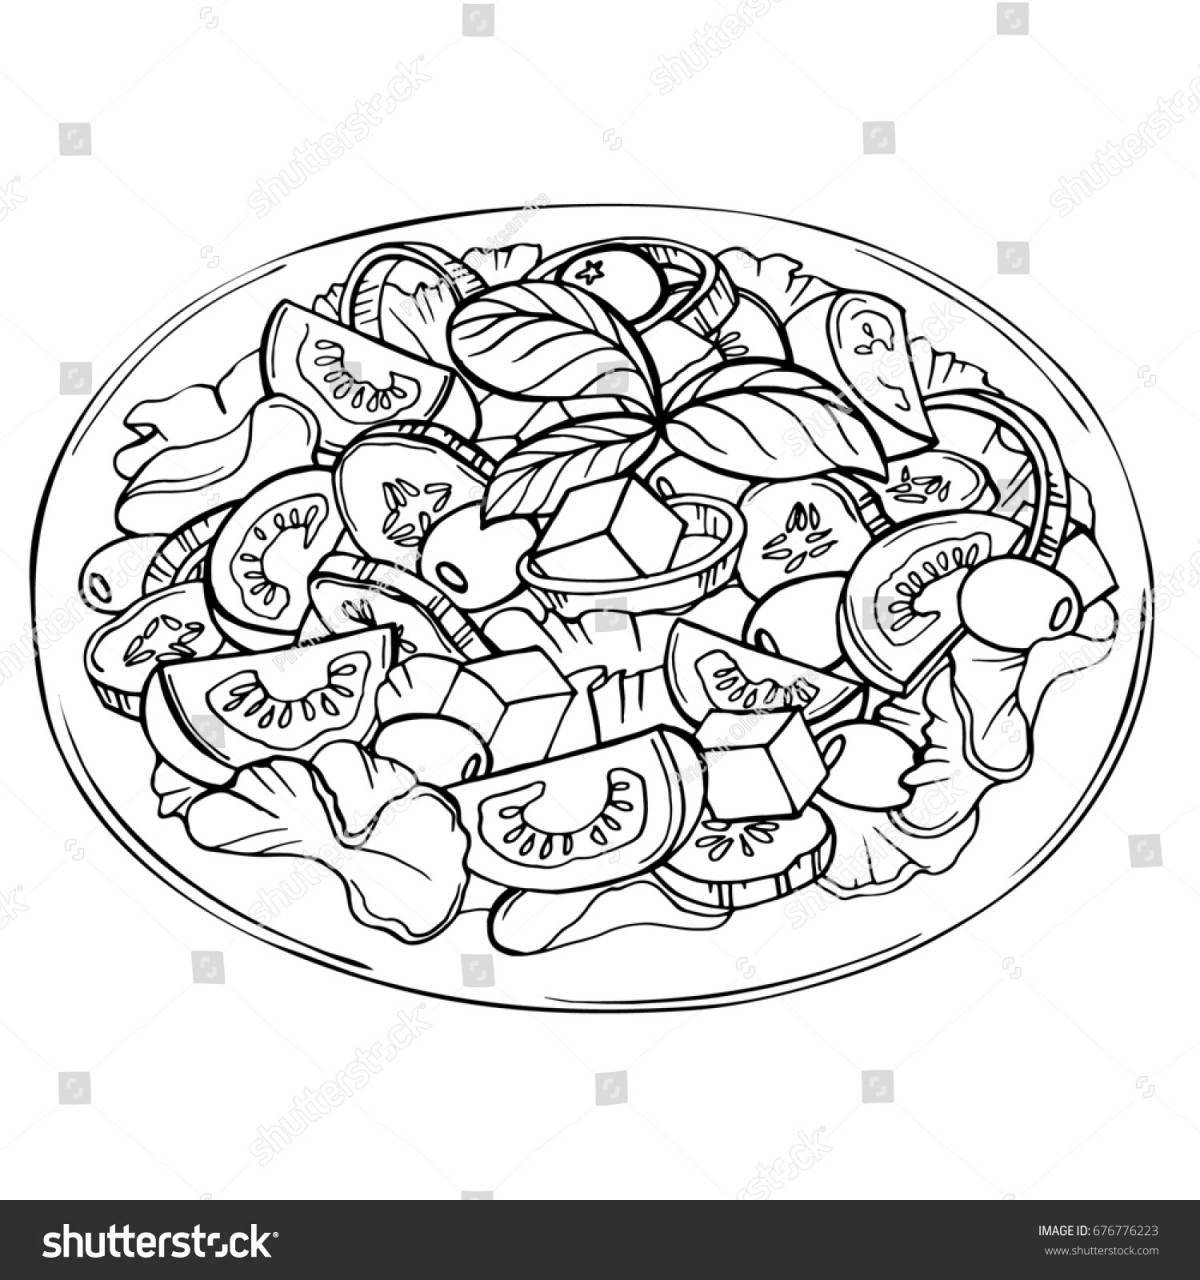 Coloring page vegetable salad with colored stuffing